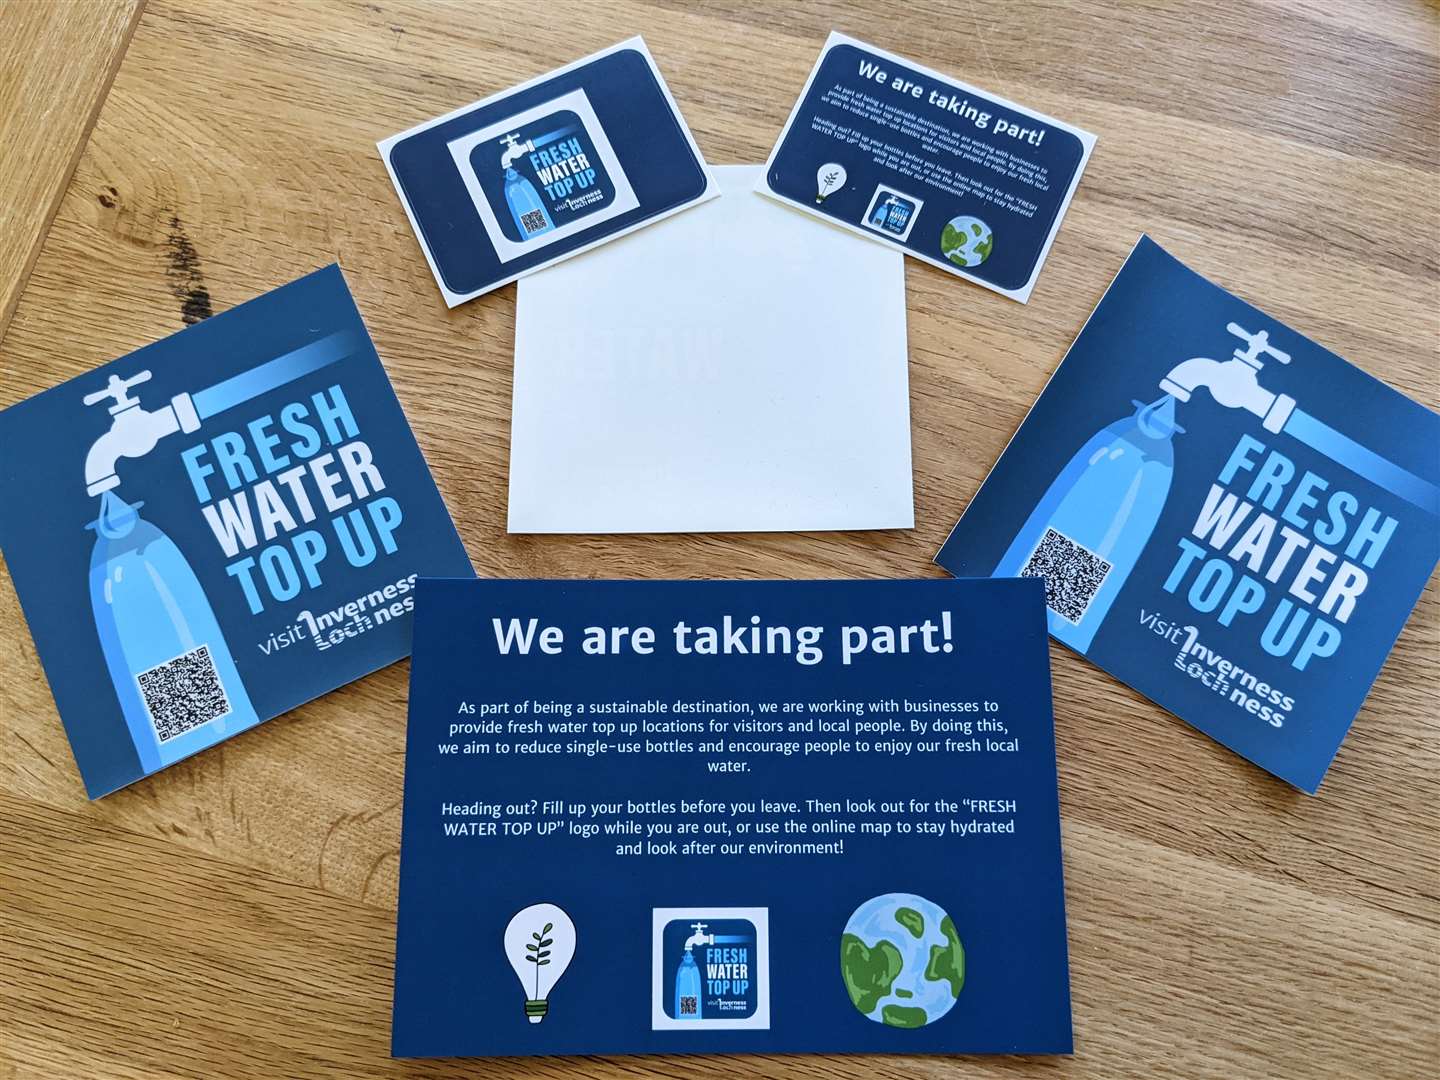 Thirty businesses have already signed up to the Fresh Water Top Up Scheme enabling visitors and local residents in the Inverness and Loch Ness area to refill their water bottles.